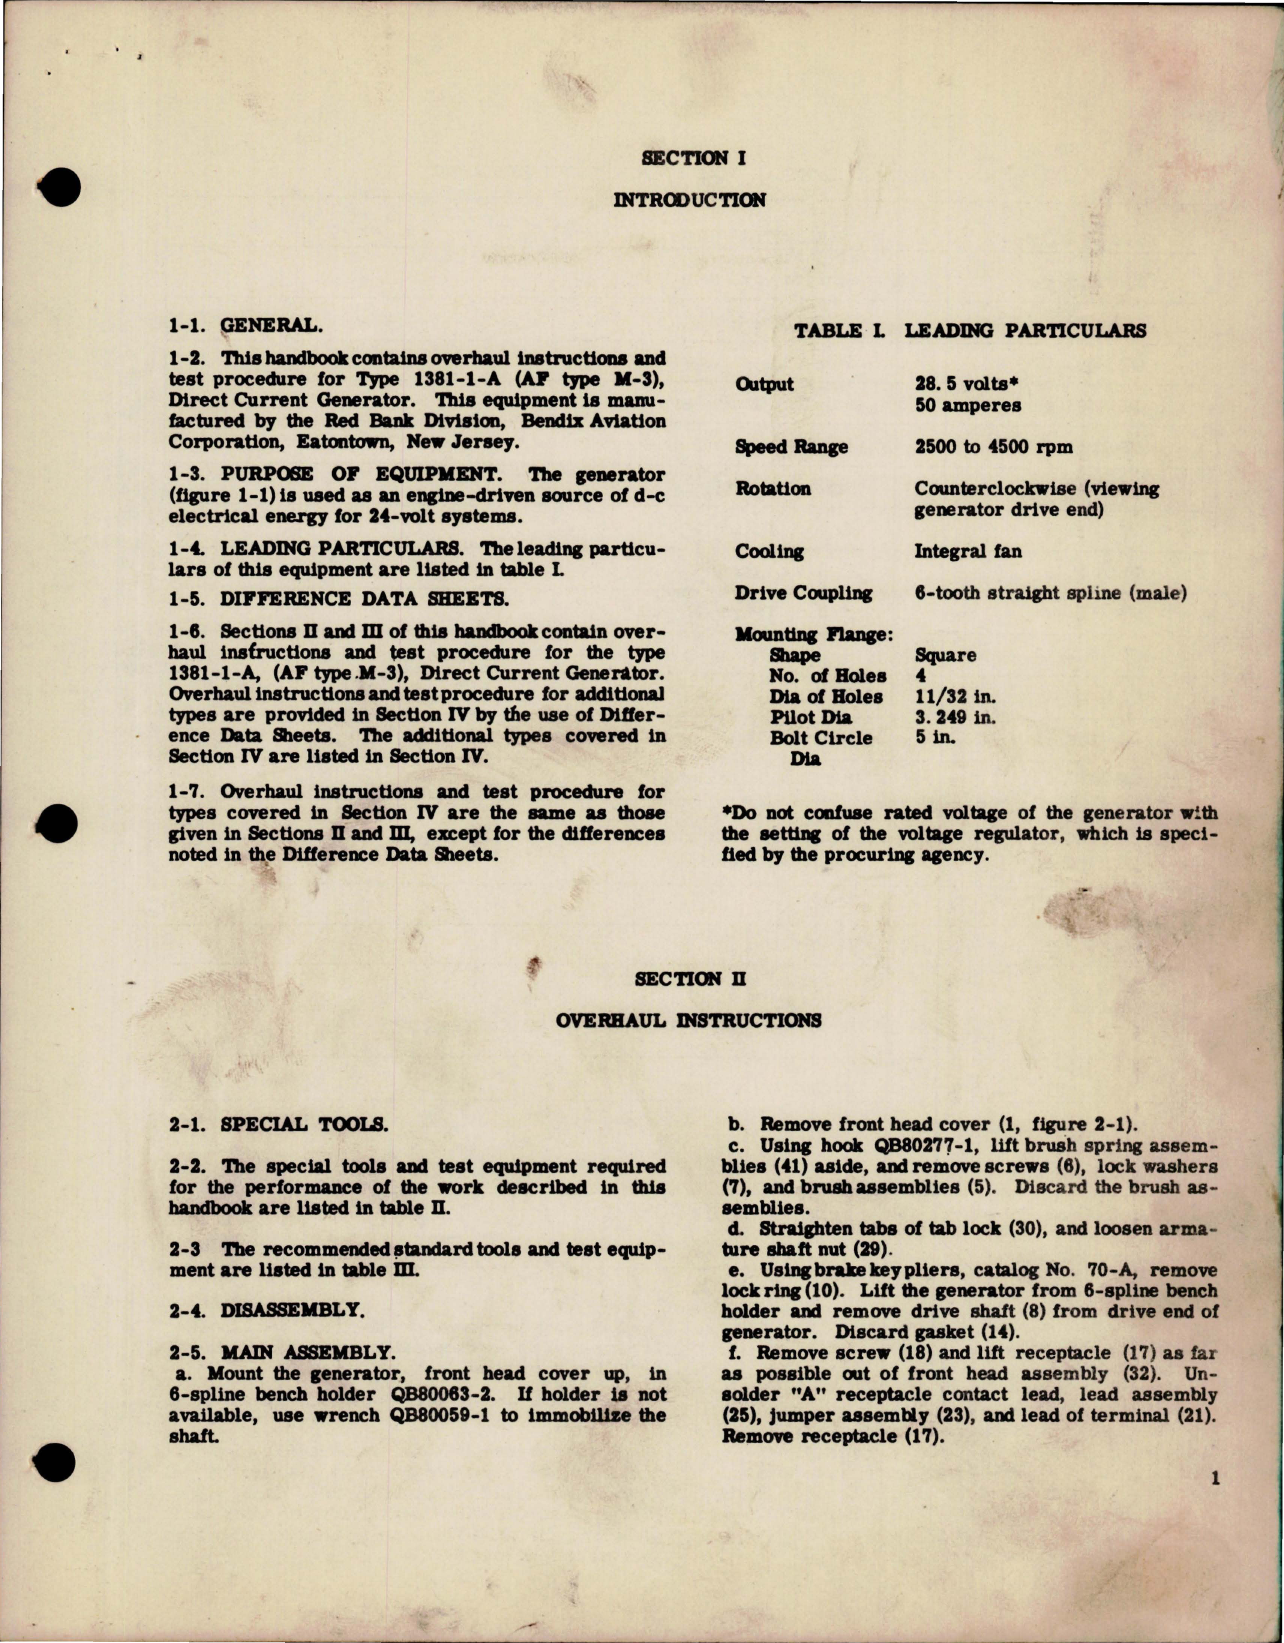 Sample page 5 from AirCorps Library document: Overhaul Instructions for Direct Current Generators - Type 1381-1-A, 30E01-2-A 